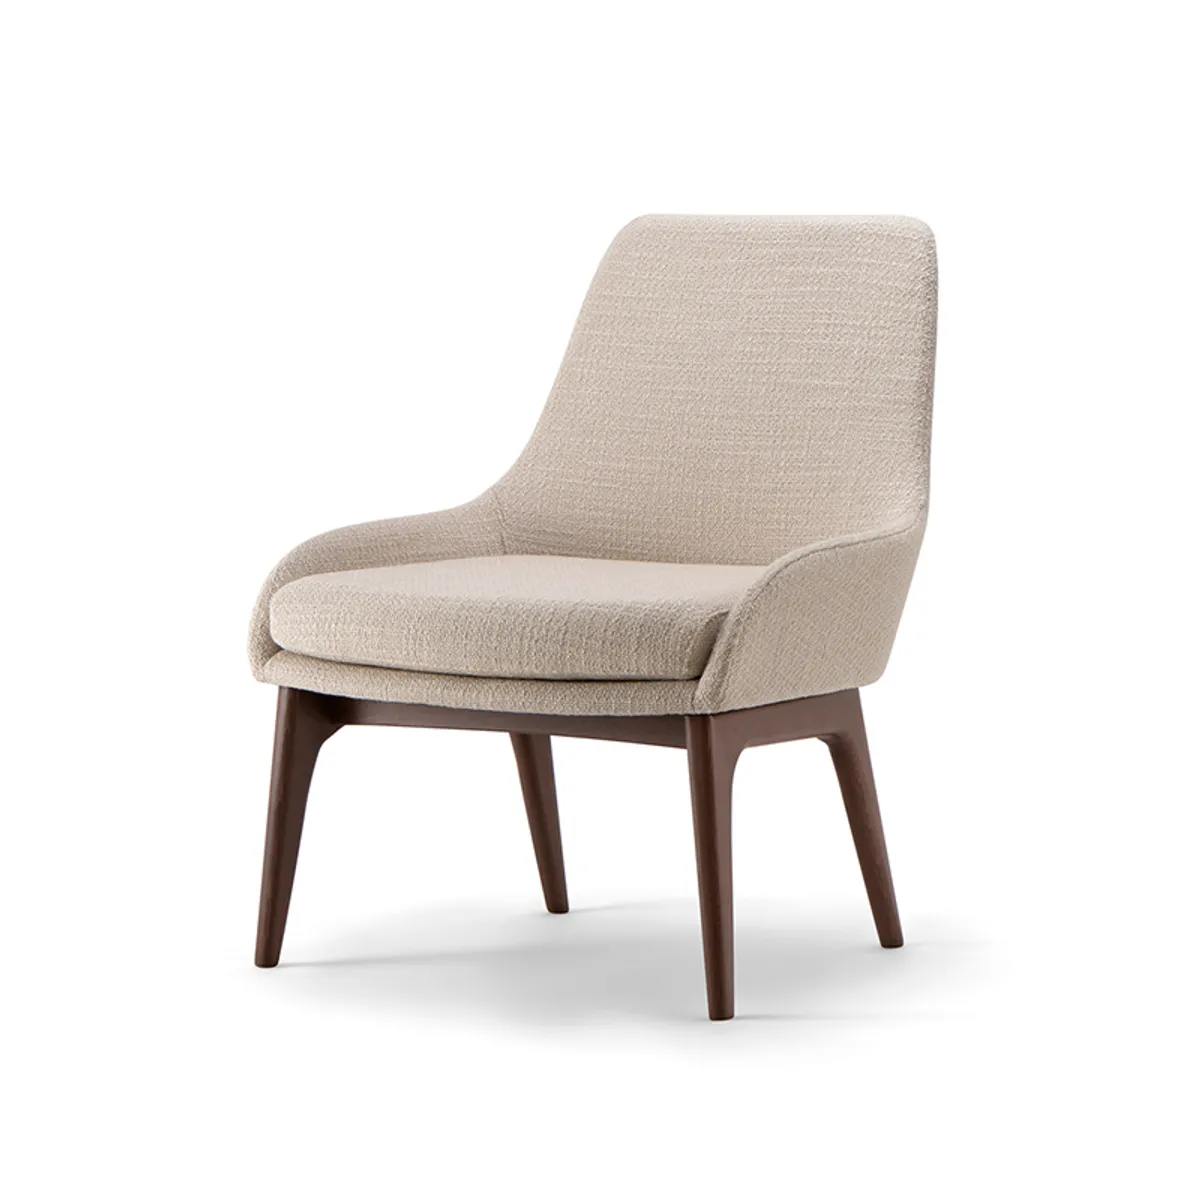 Josie Lounge Chair Upholstered Hotel Furniture By Insideoutcontracts